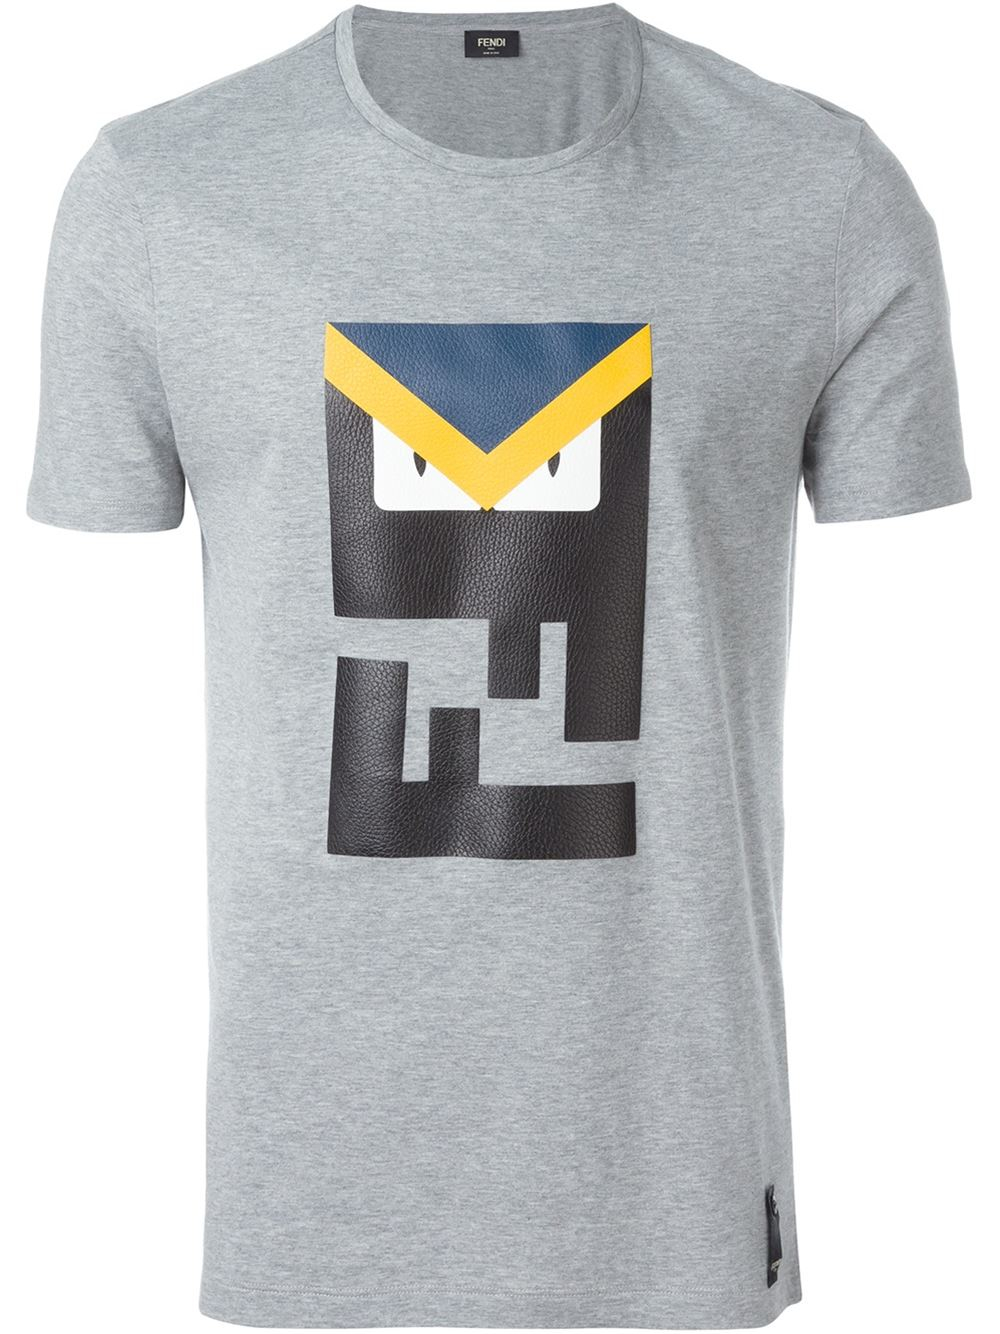 Fendi t shirt grey - Cheap stores online, jumpsuits and rompers for ...